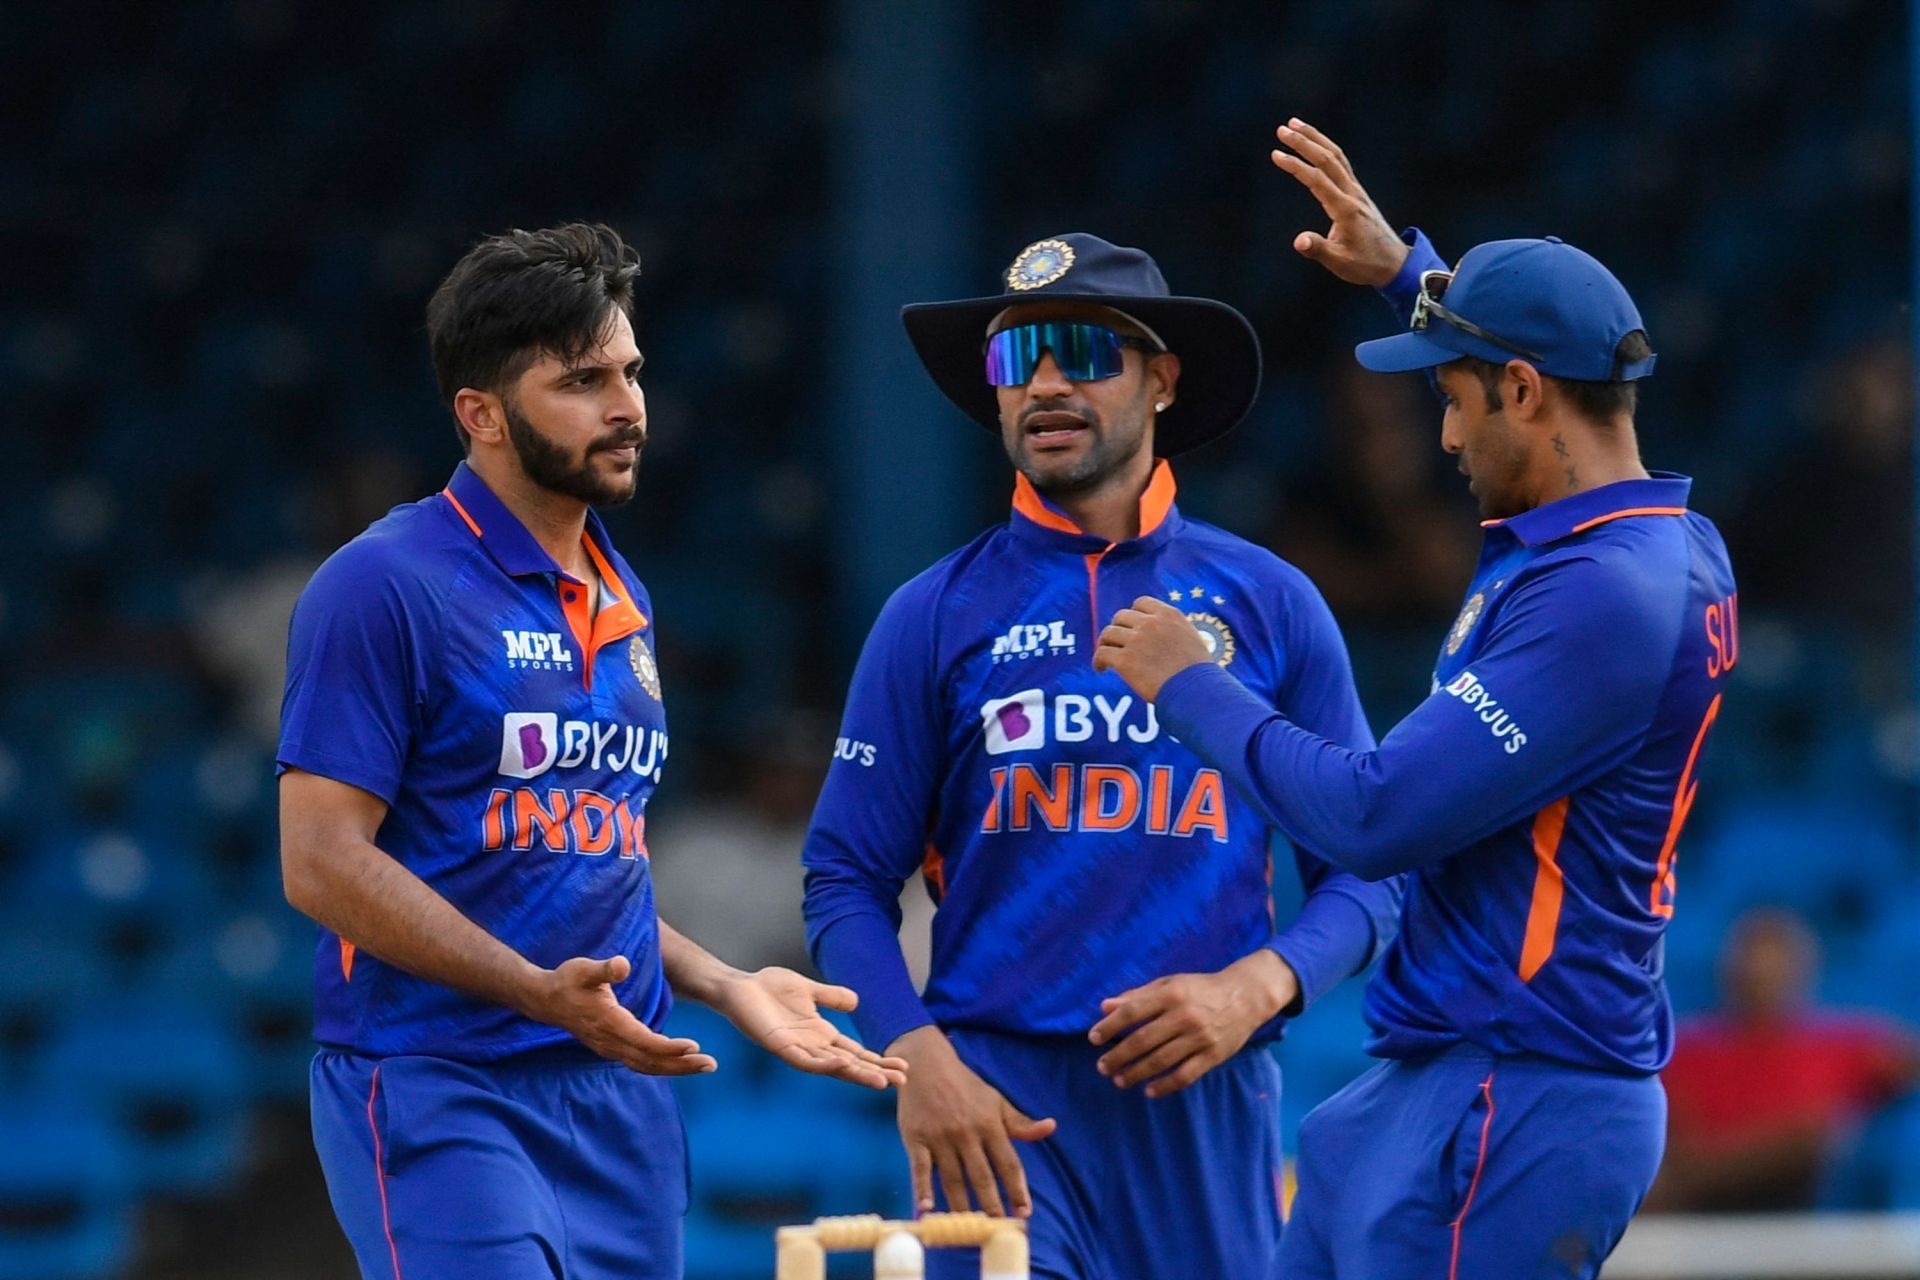 Shardul Thakur has been amongst the wickets in the ODI series against the West Indies [P/C: BCCI/Twitter]